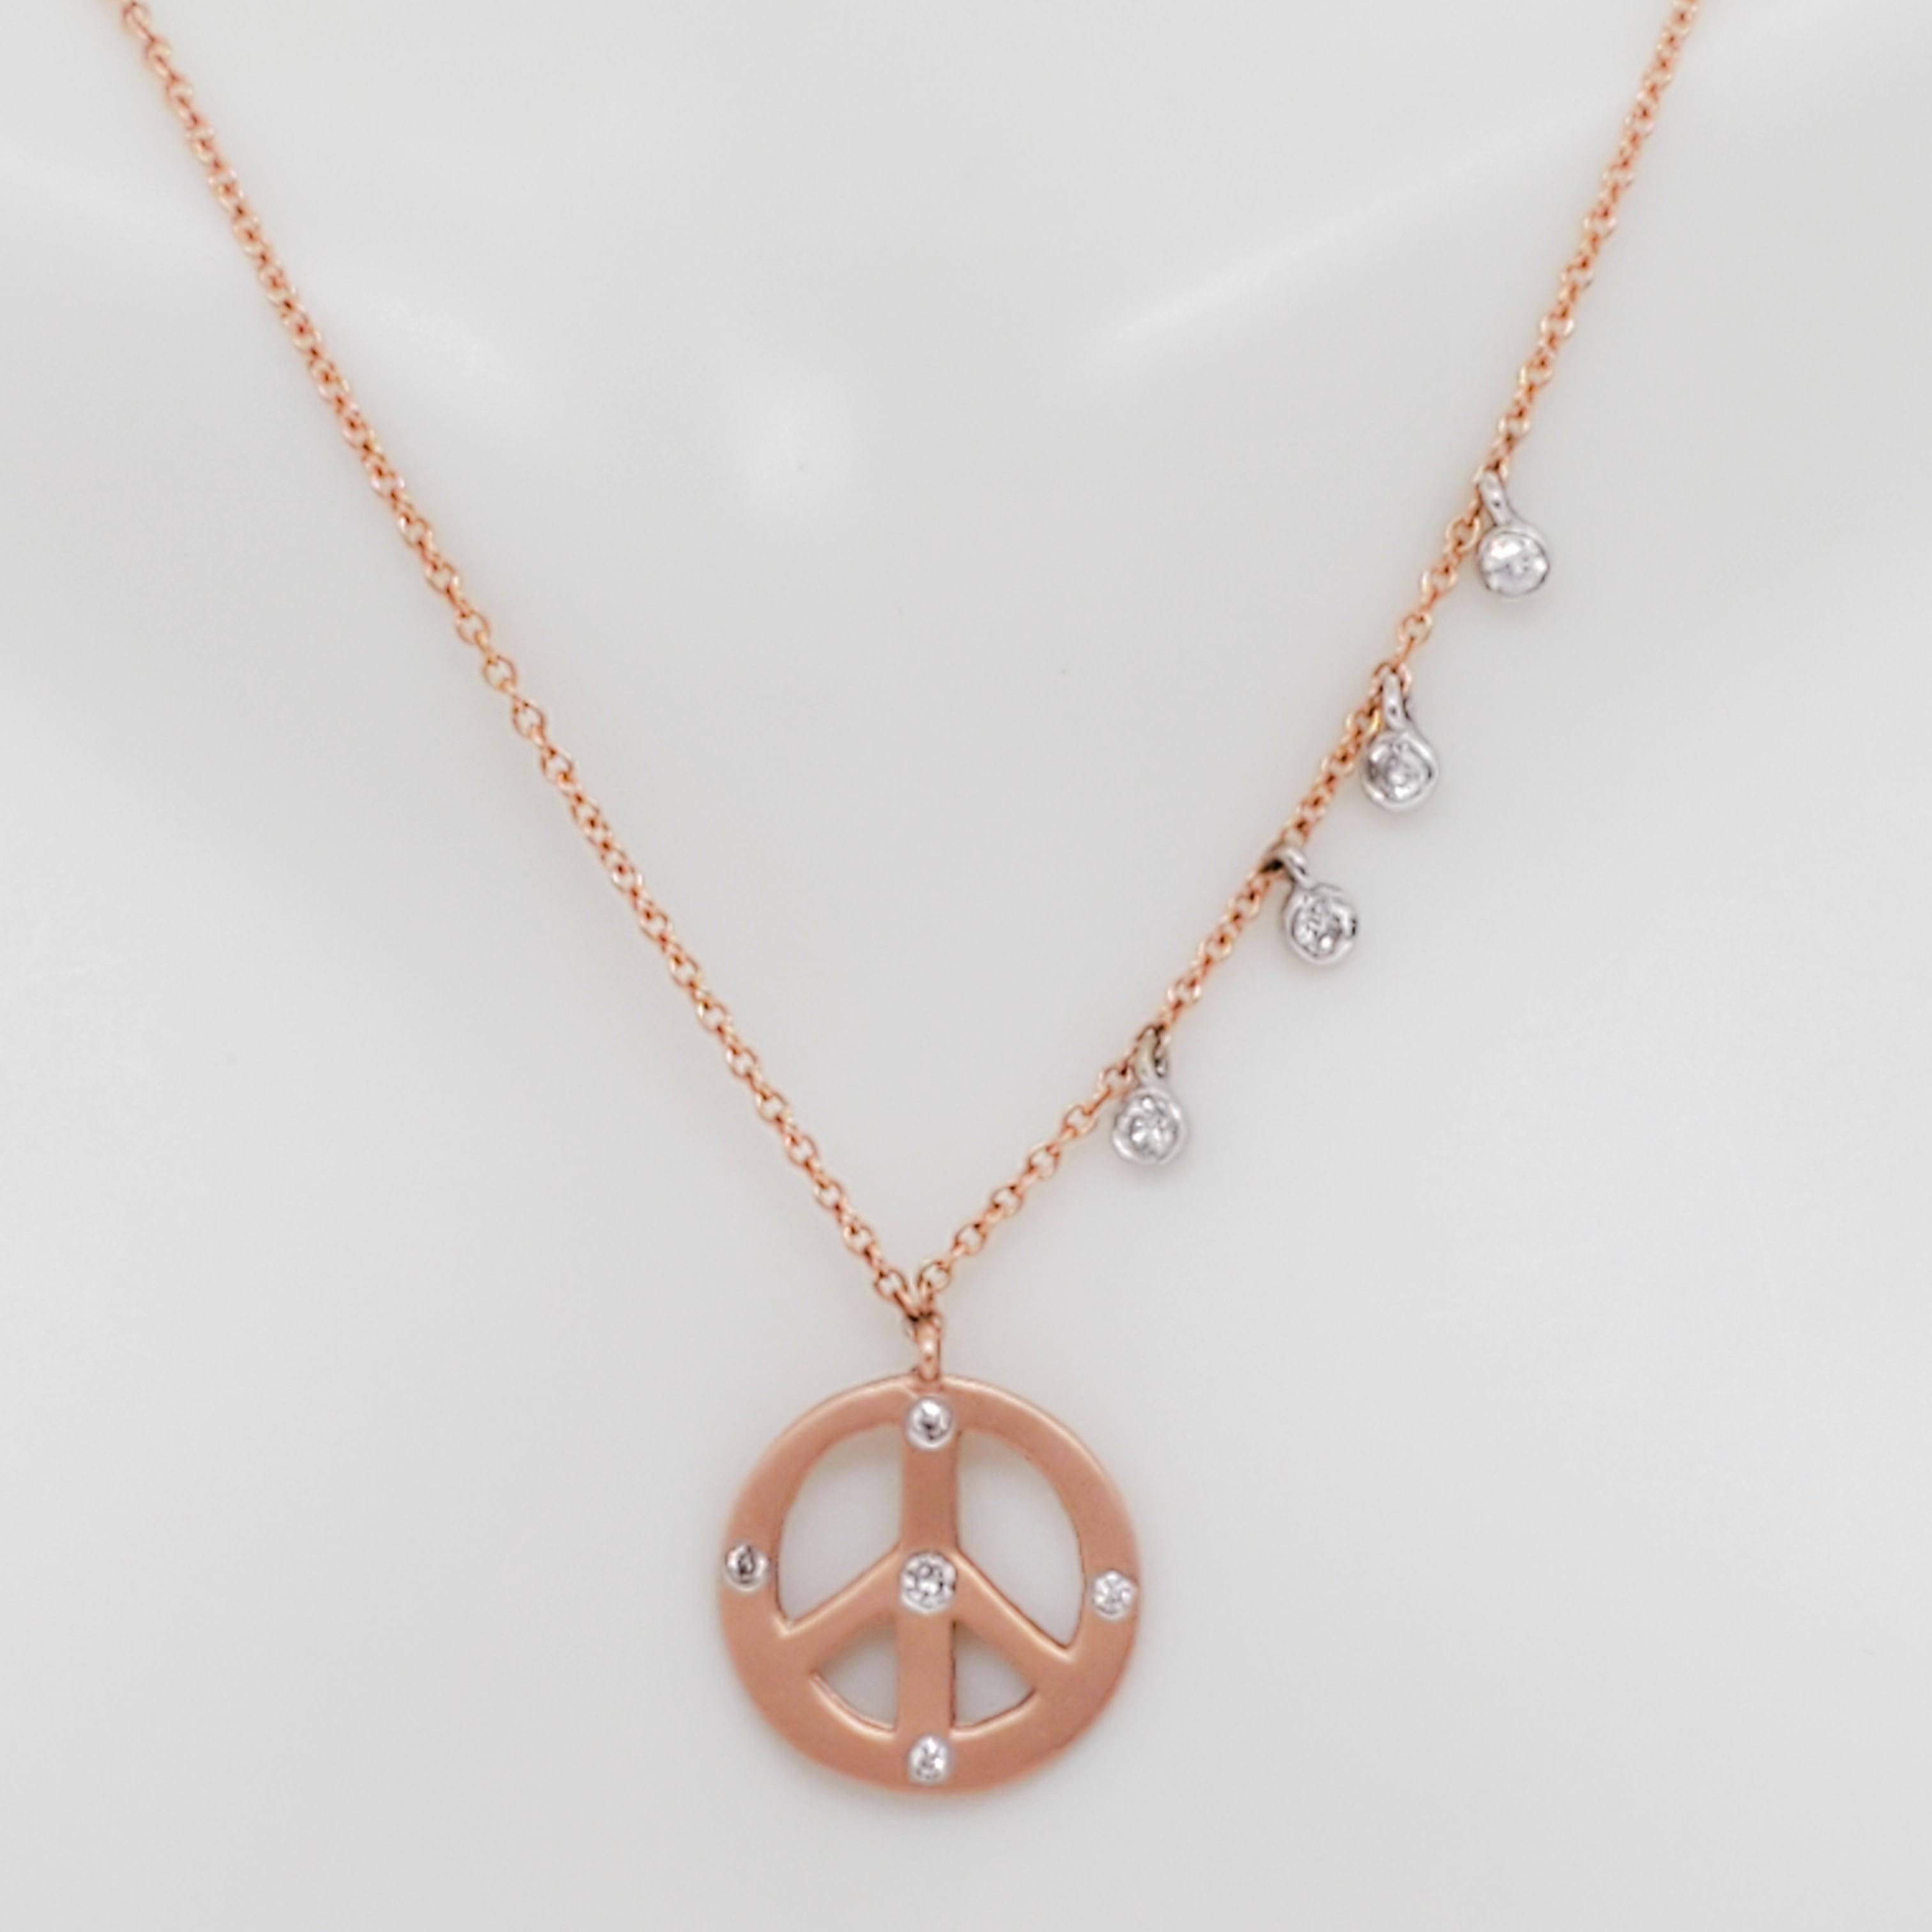 Estate Peace Sign Diamond Pendant Necklace in 14k Rose and White Gold 1